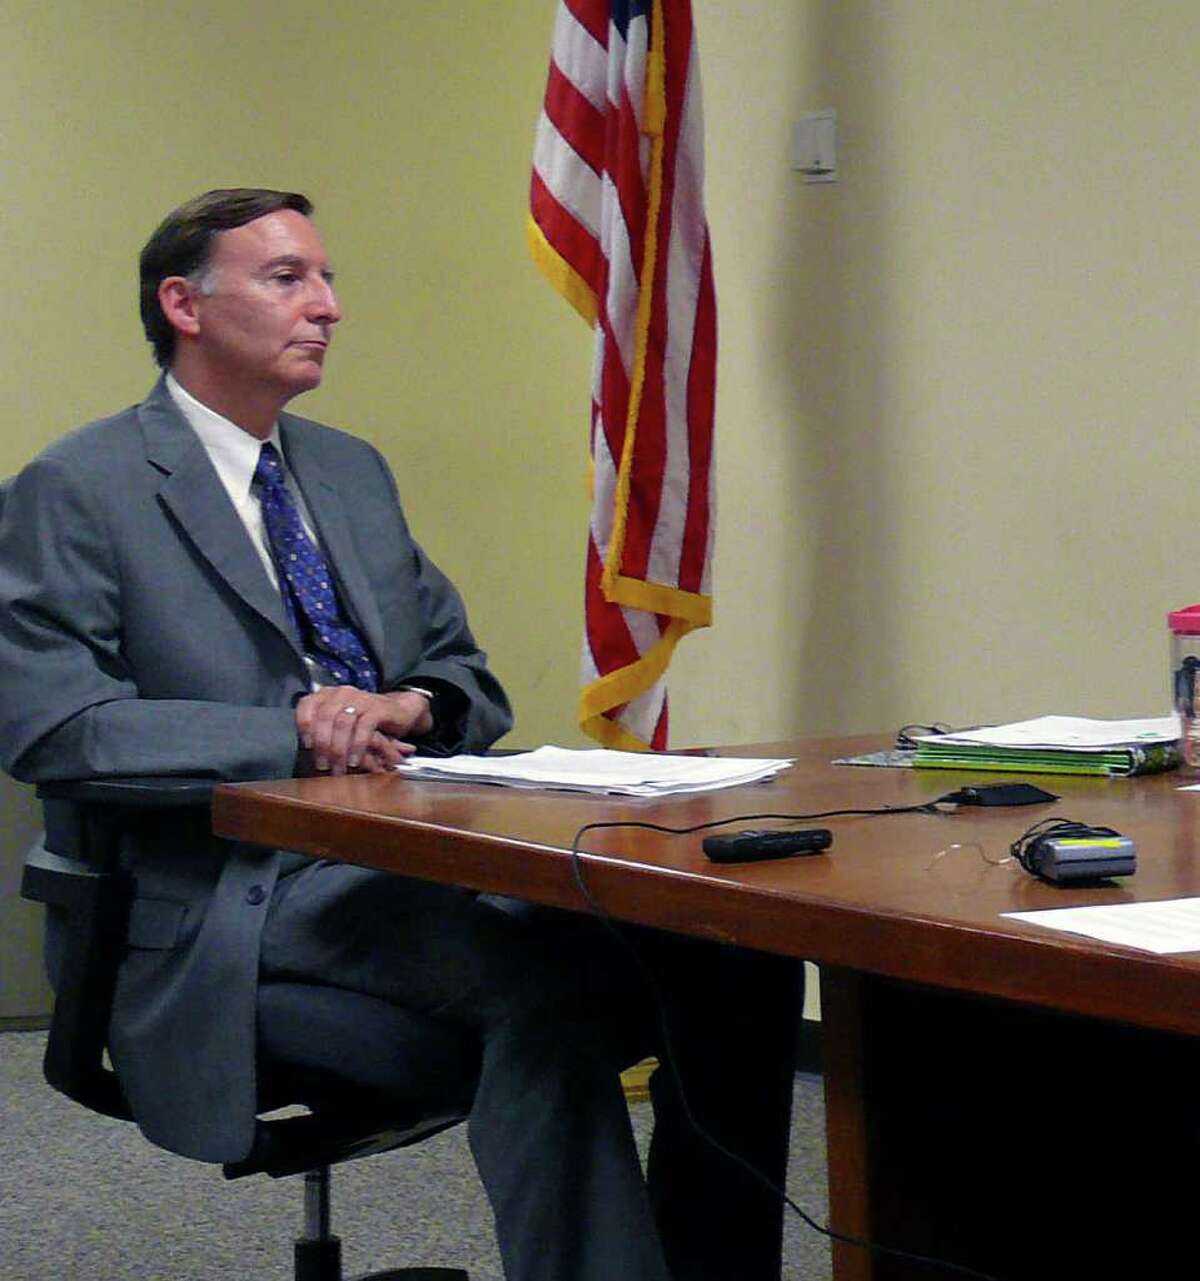 Former First Selectman Kenneth Flatto appeared before a subcommittee of the Representative Town Meeting reviewing the Fairfield Metro train station project. Despite a report from outside counsel that says differently, Flatto still contends he had the authority to enter into an amended agreement with the state and the private developer.